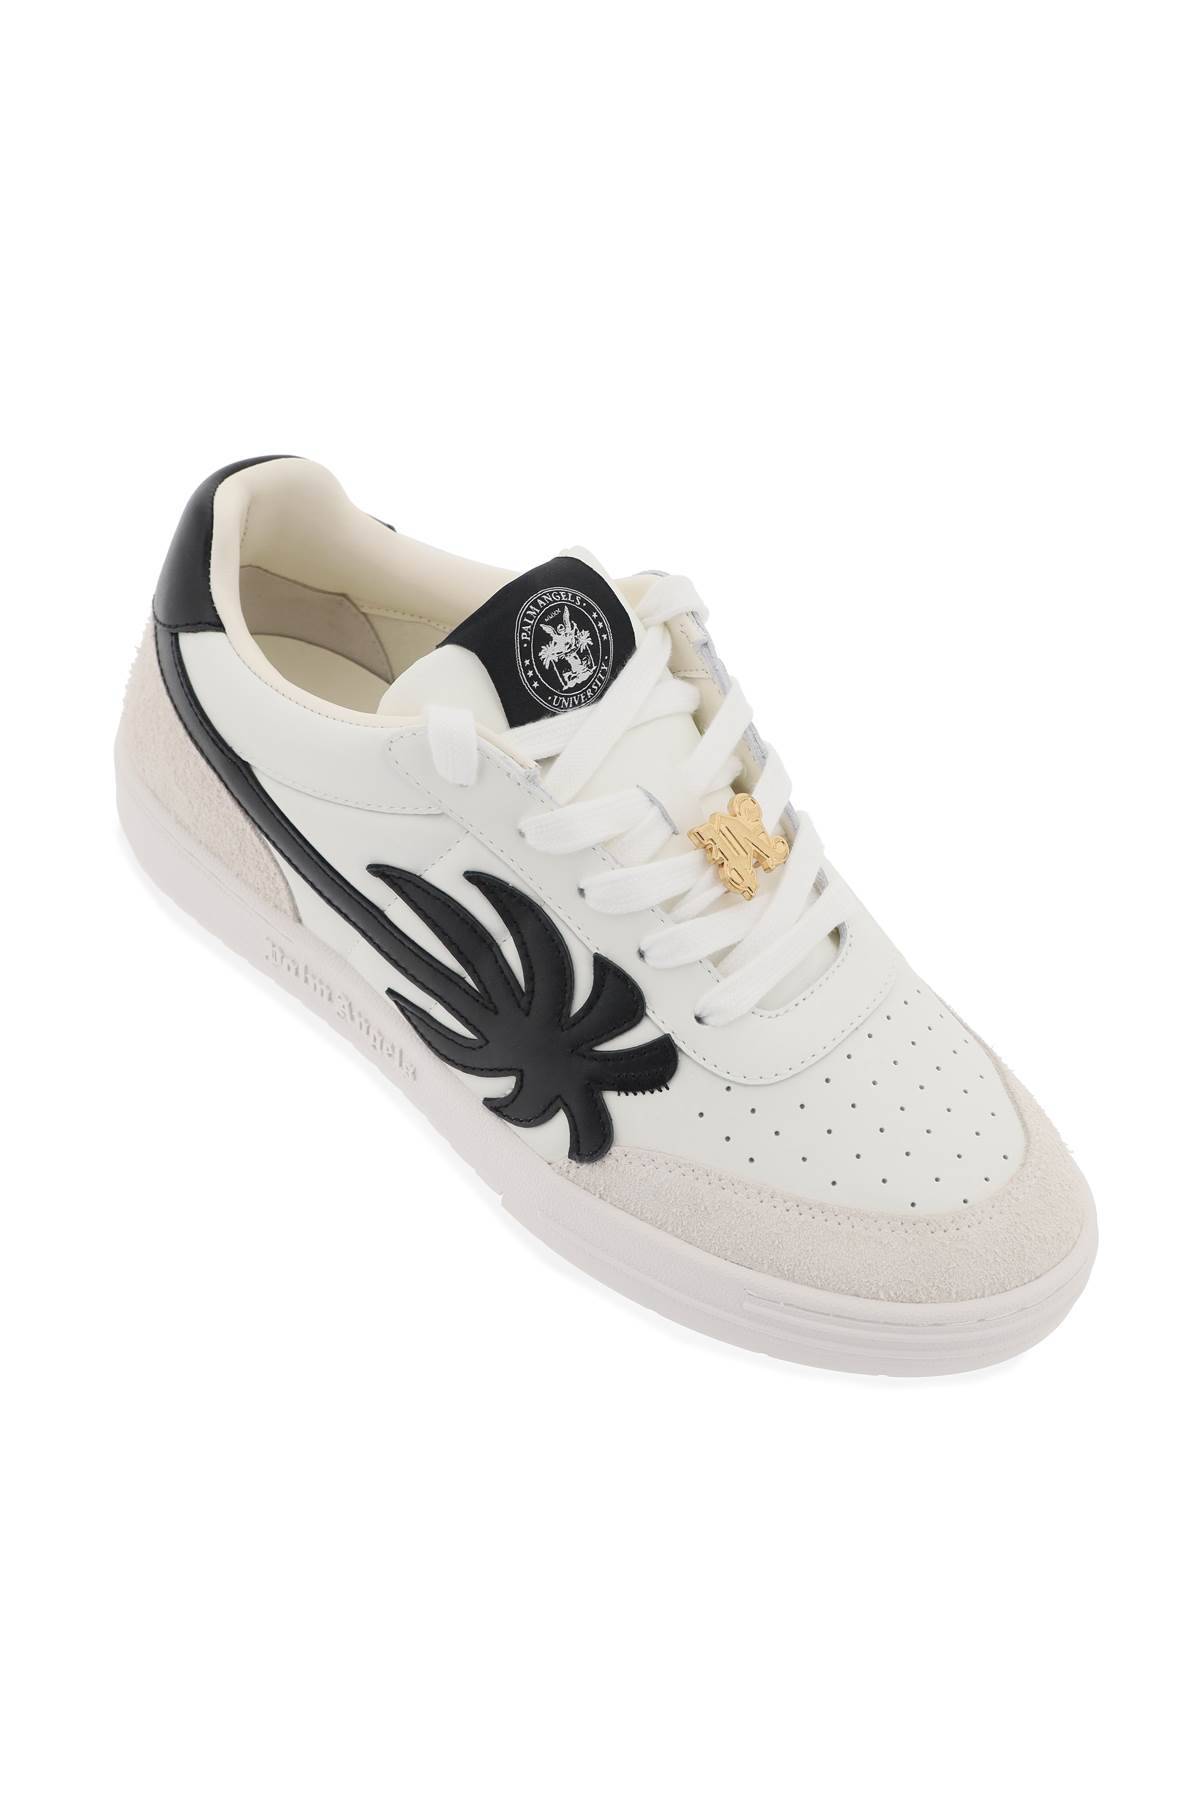 Shop Palm Angels Palm Beach University Sneakers In White,black